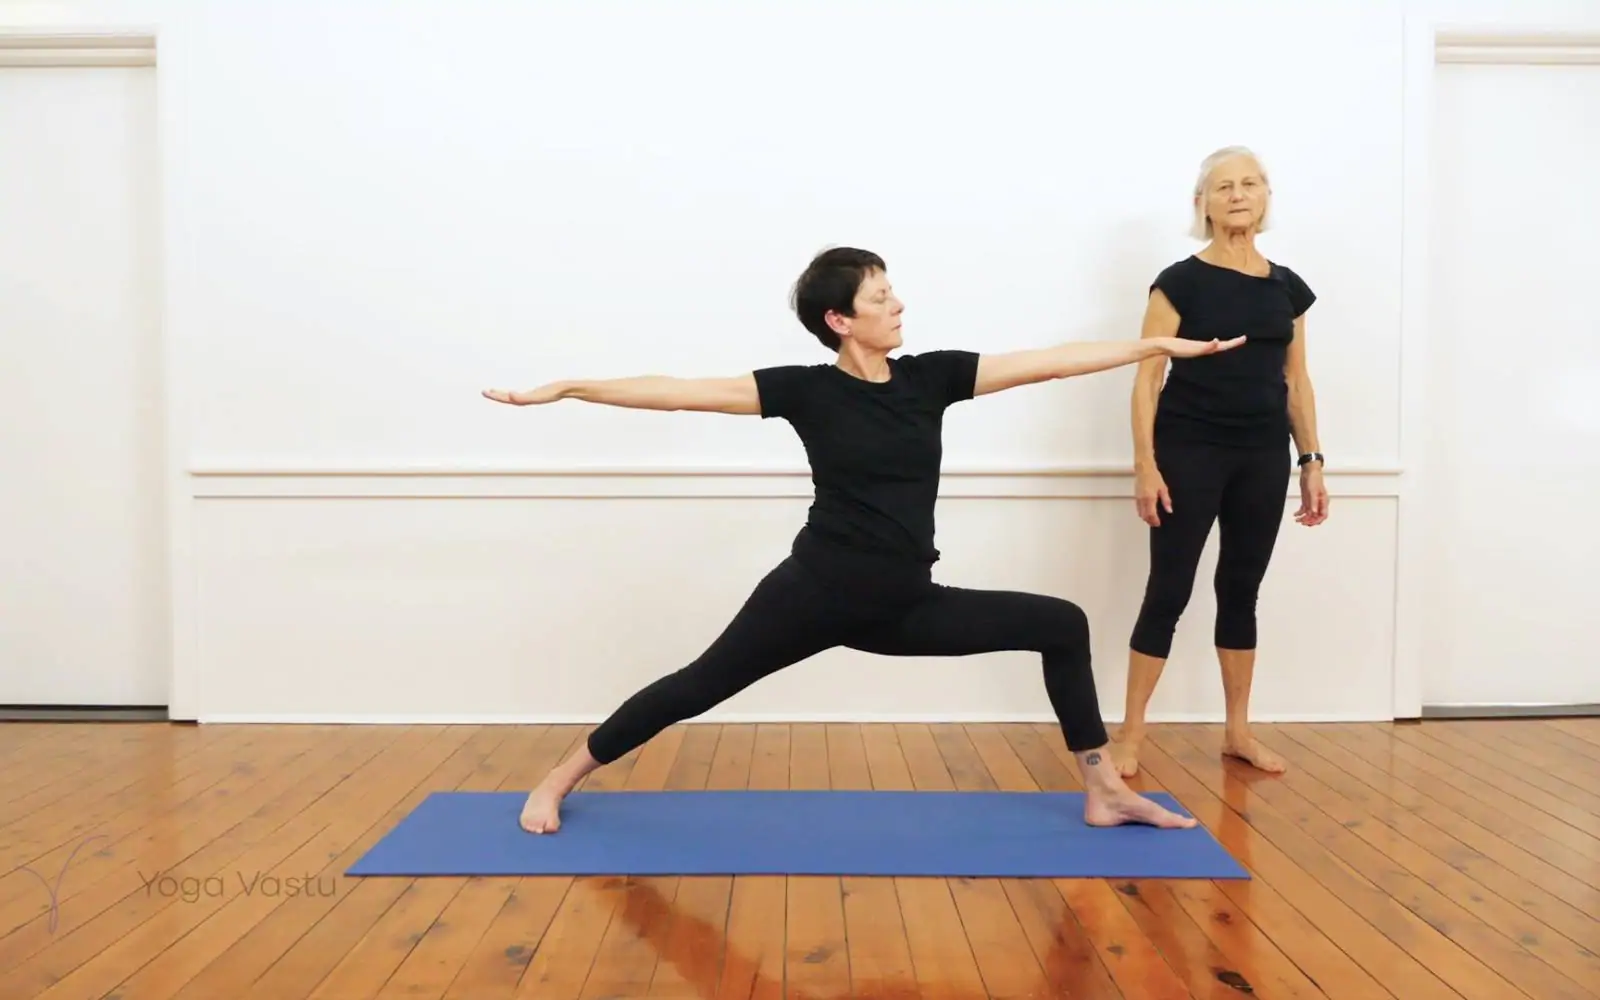 Warrior 2: Benefits, Instructions, Variations, and More | YOGA